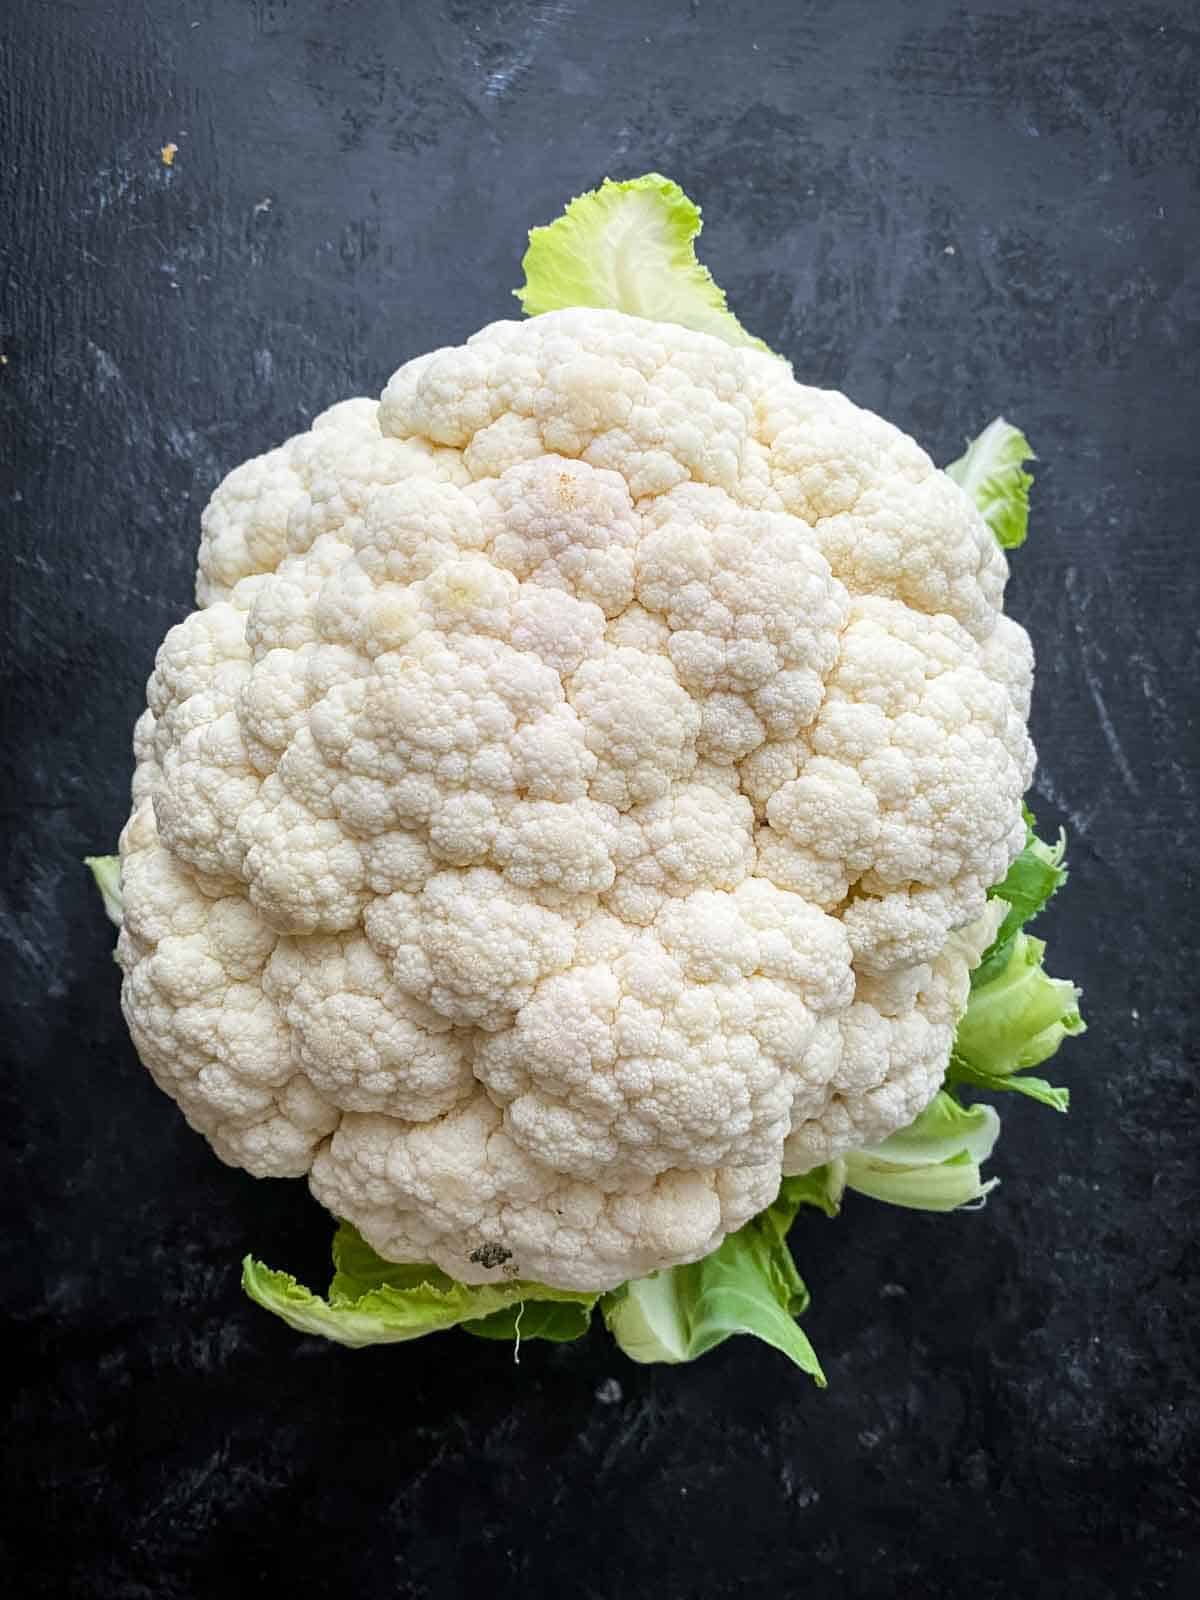 Whole cauliflower with green leaves